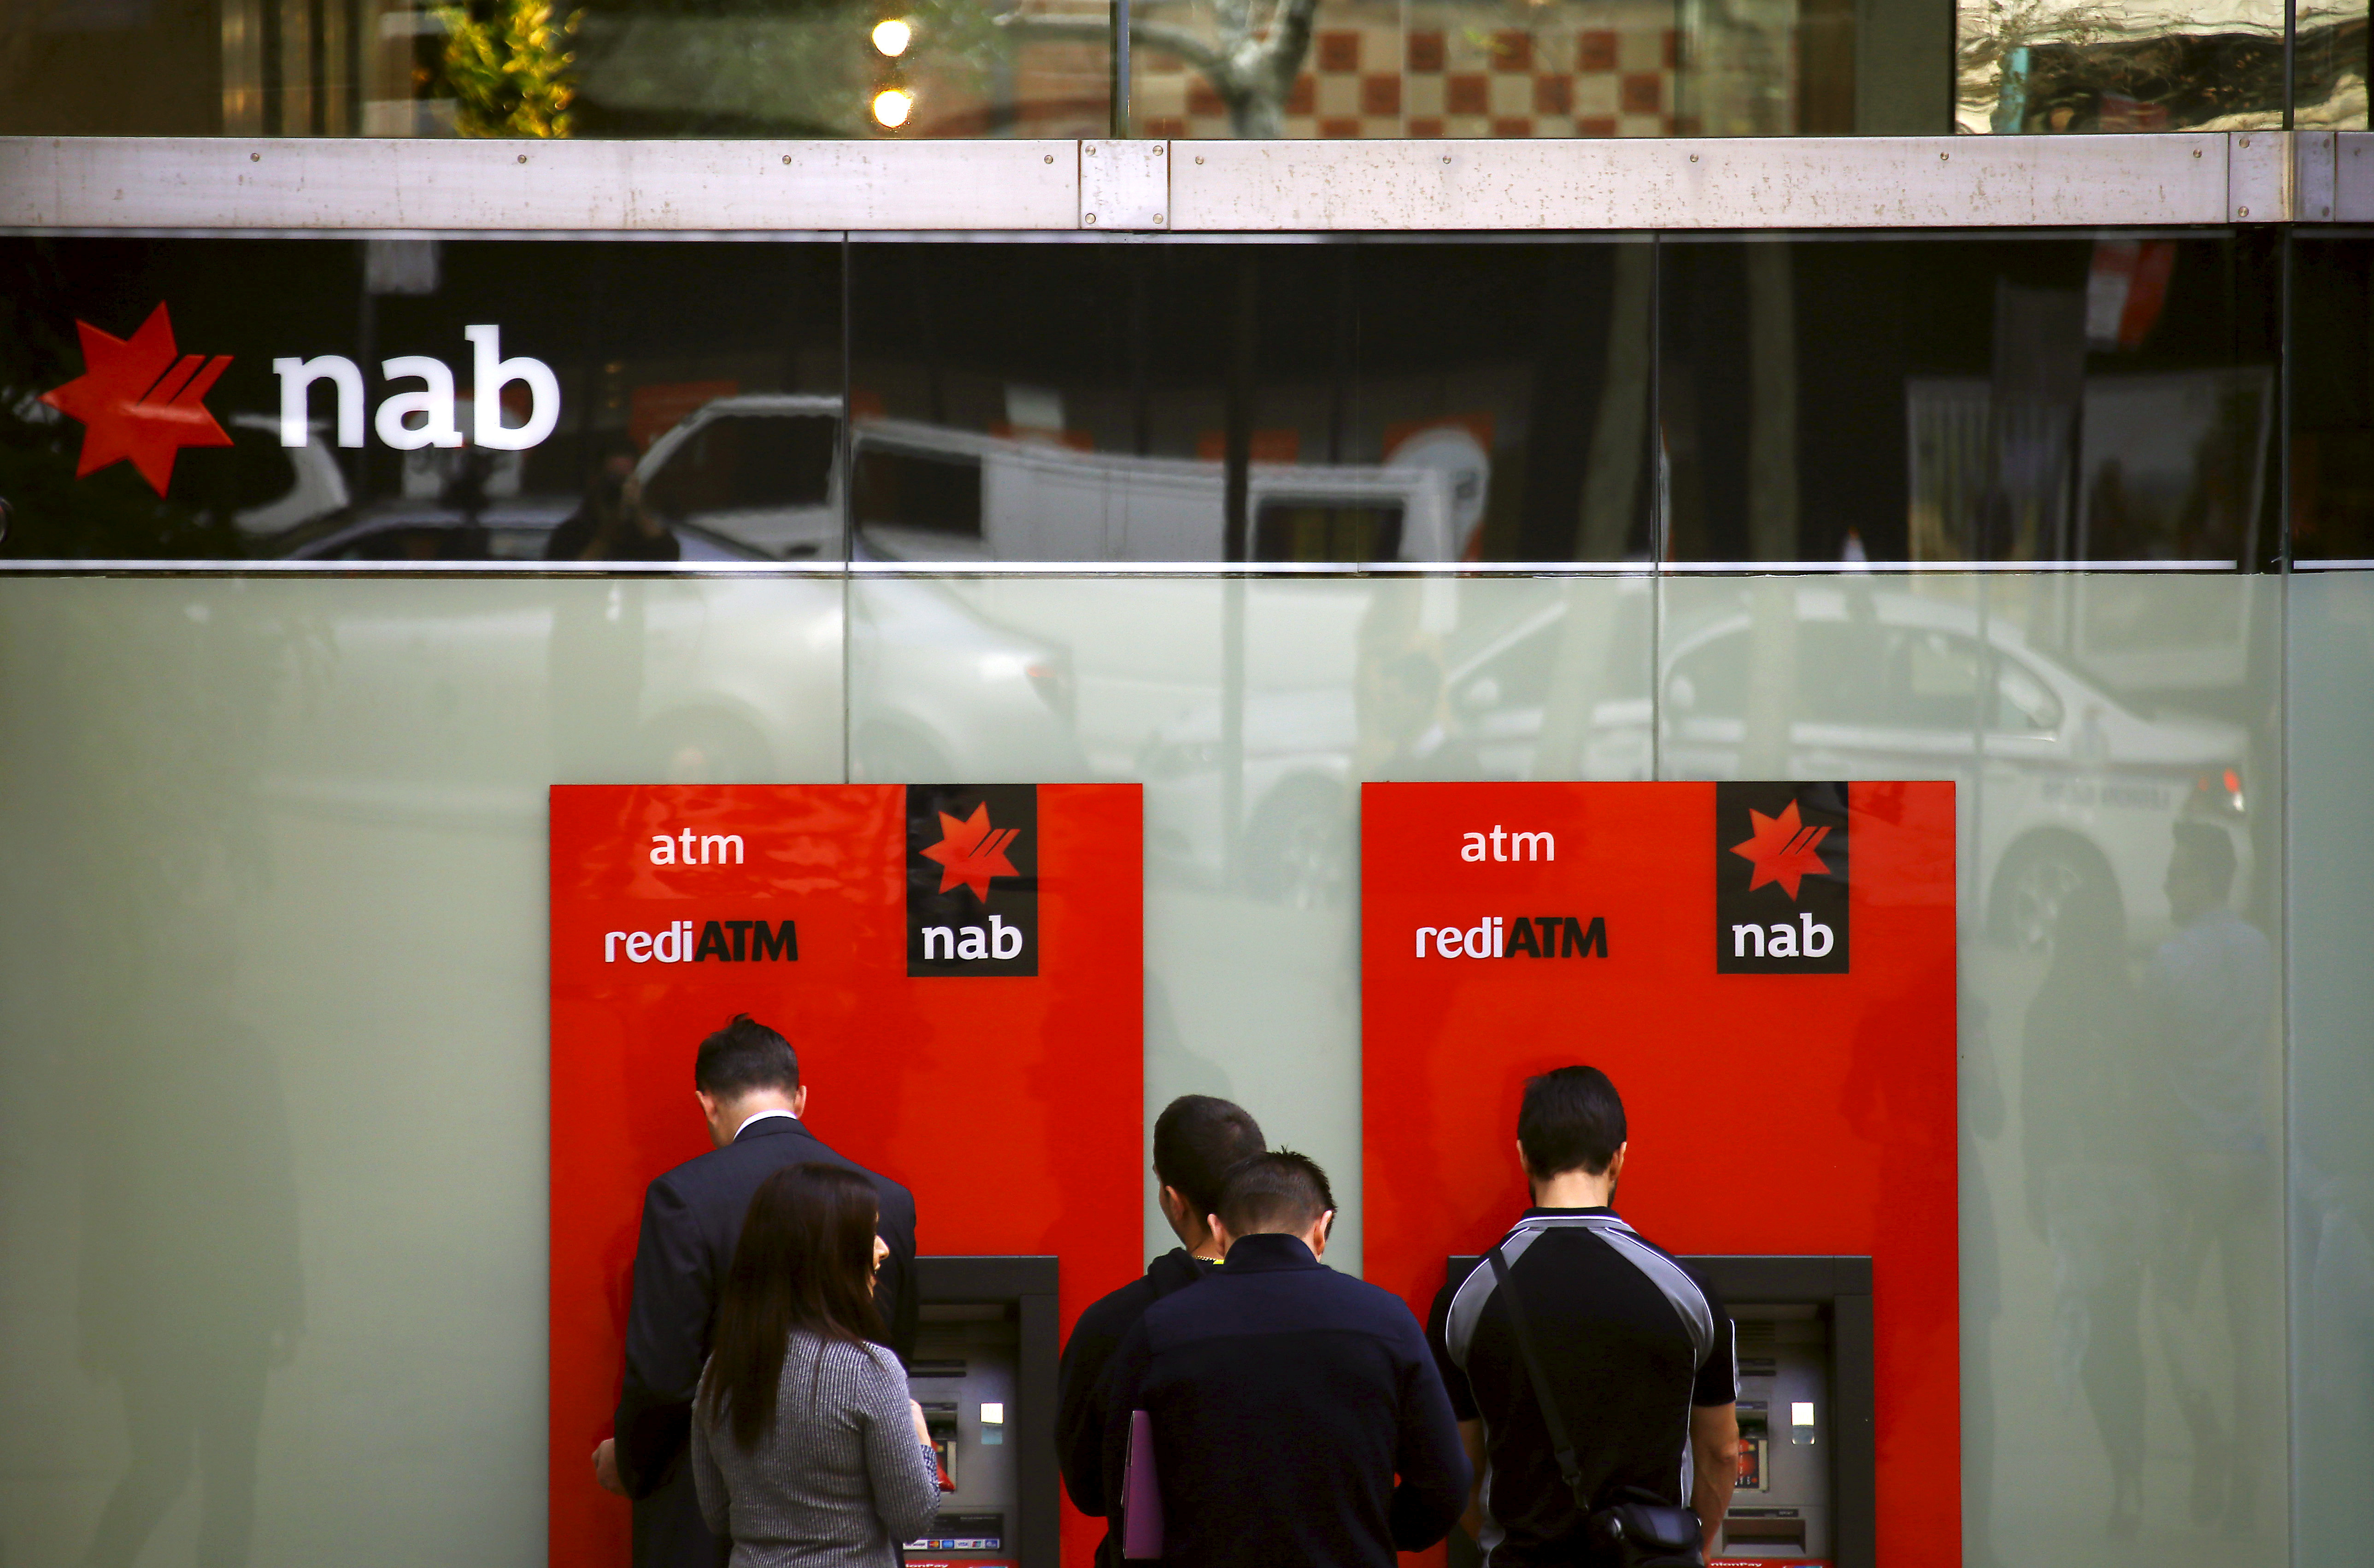 File photo of customers withdrawing money from National Australia Bank ATMs in central Sydney, Australia